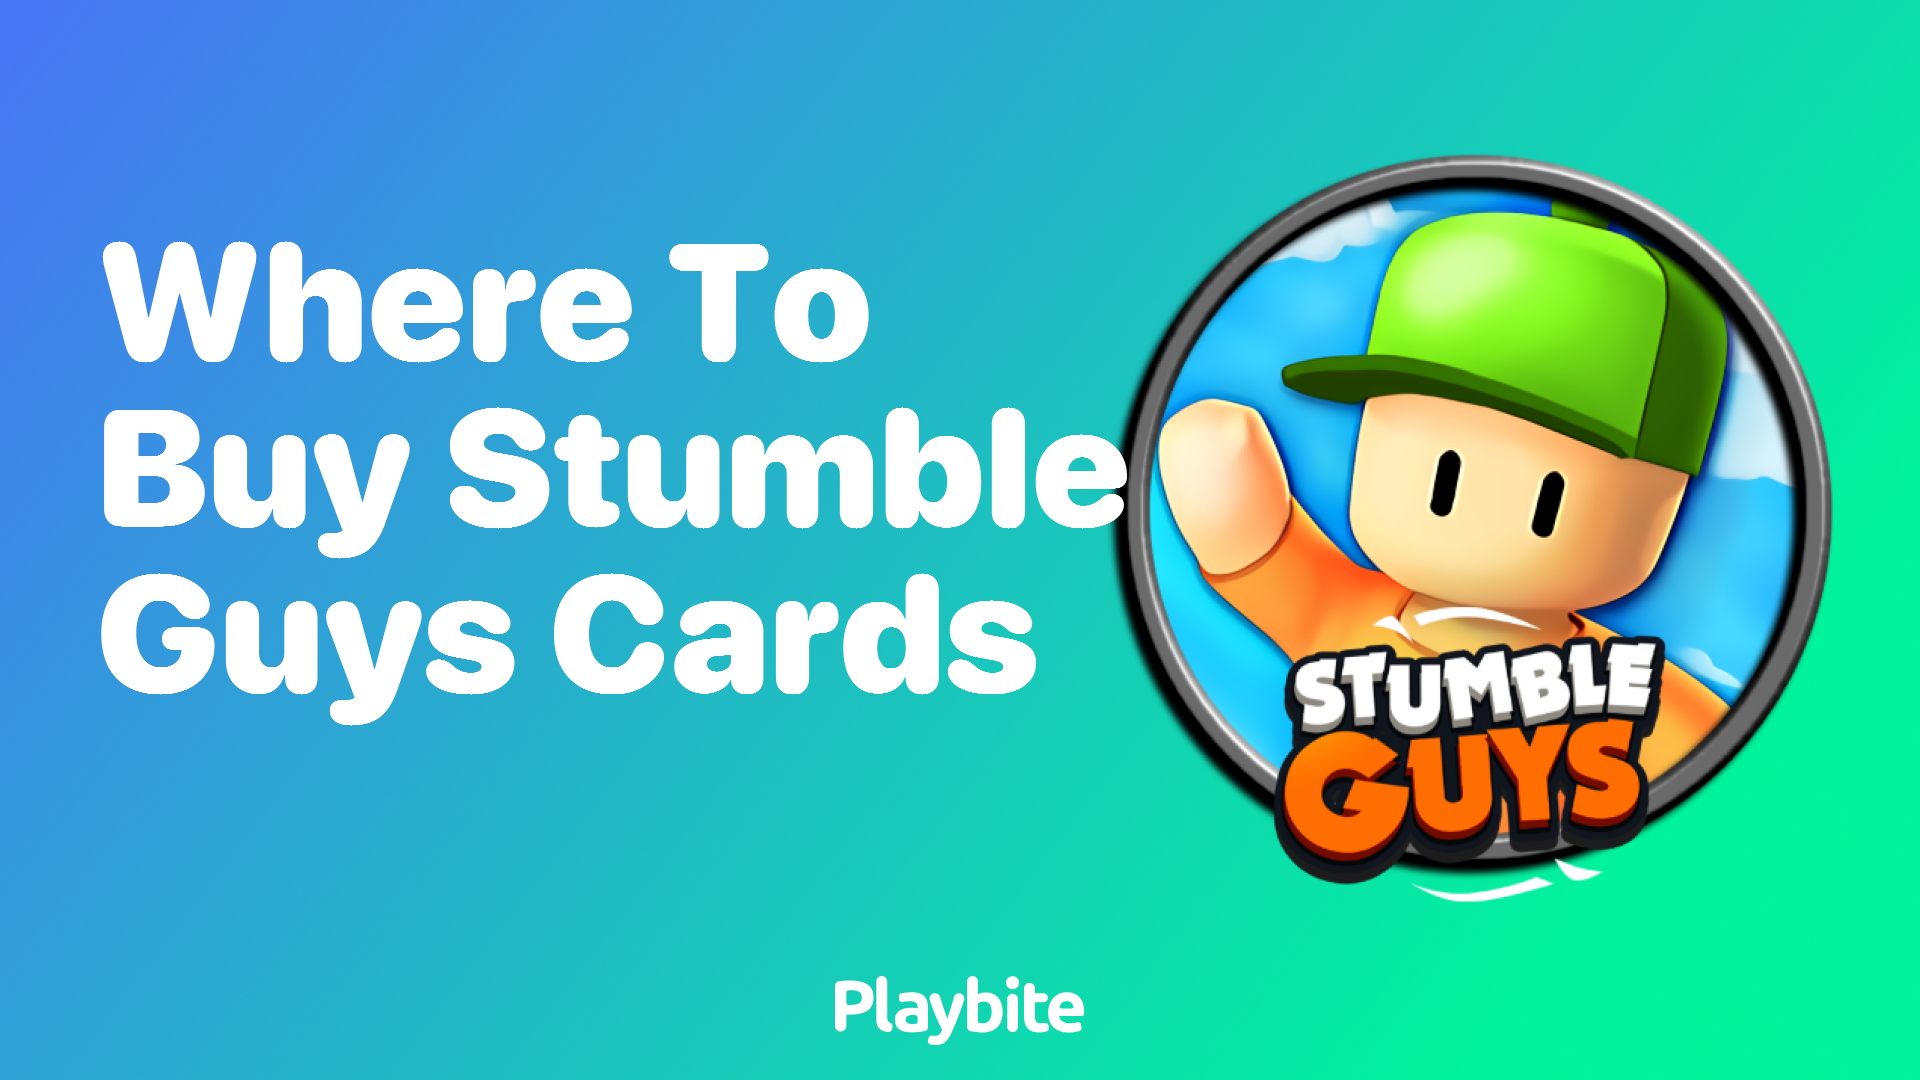 Where to Buy Stumble Guys Cards? A Handy Guide